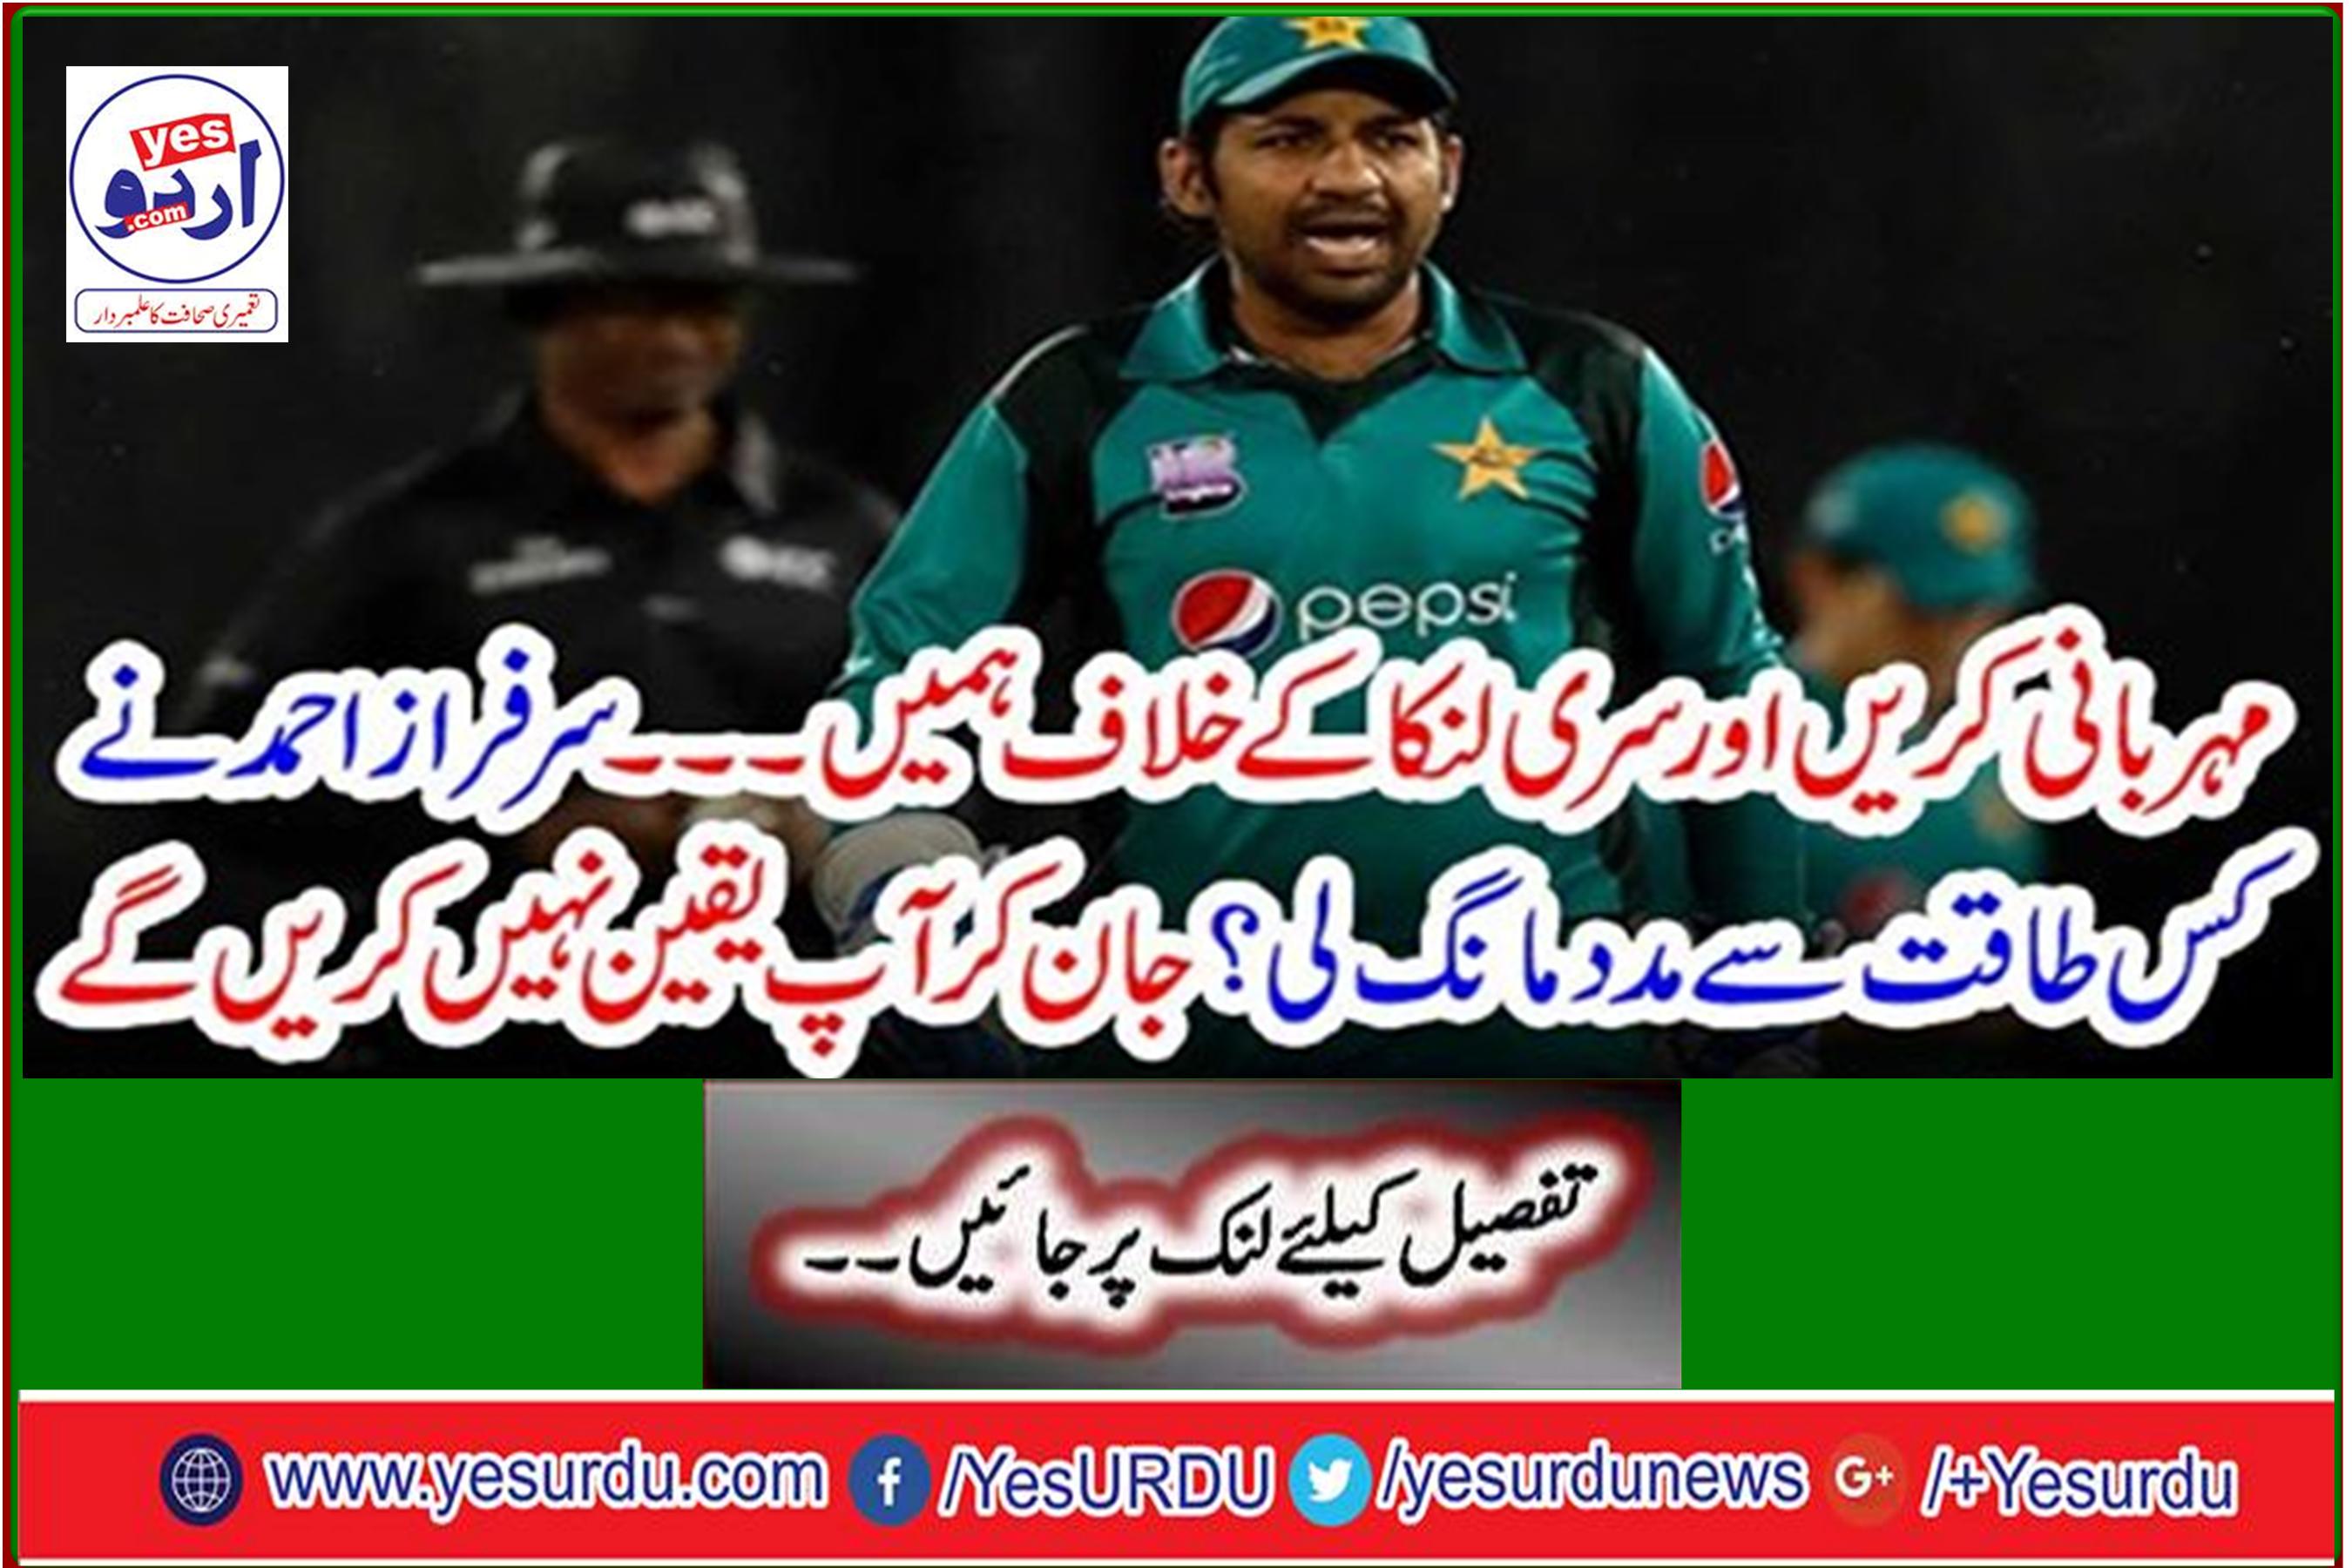 By what strength did Sarfraz Ahmed seek help? Knowing you will not believe